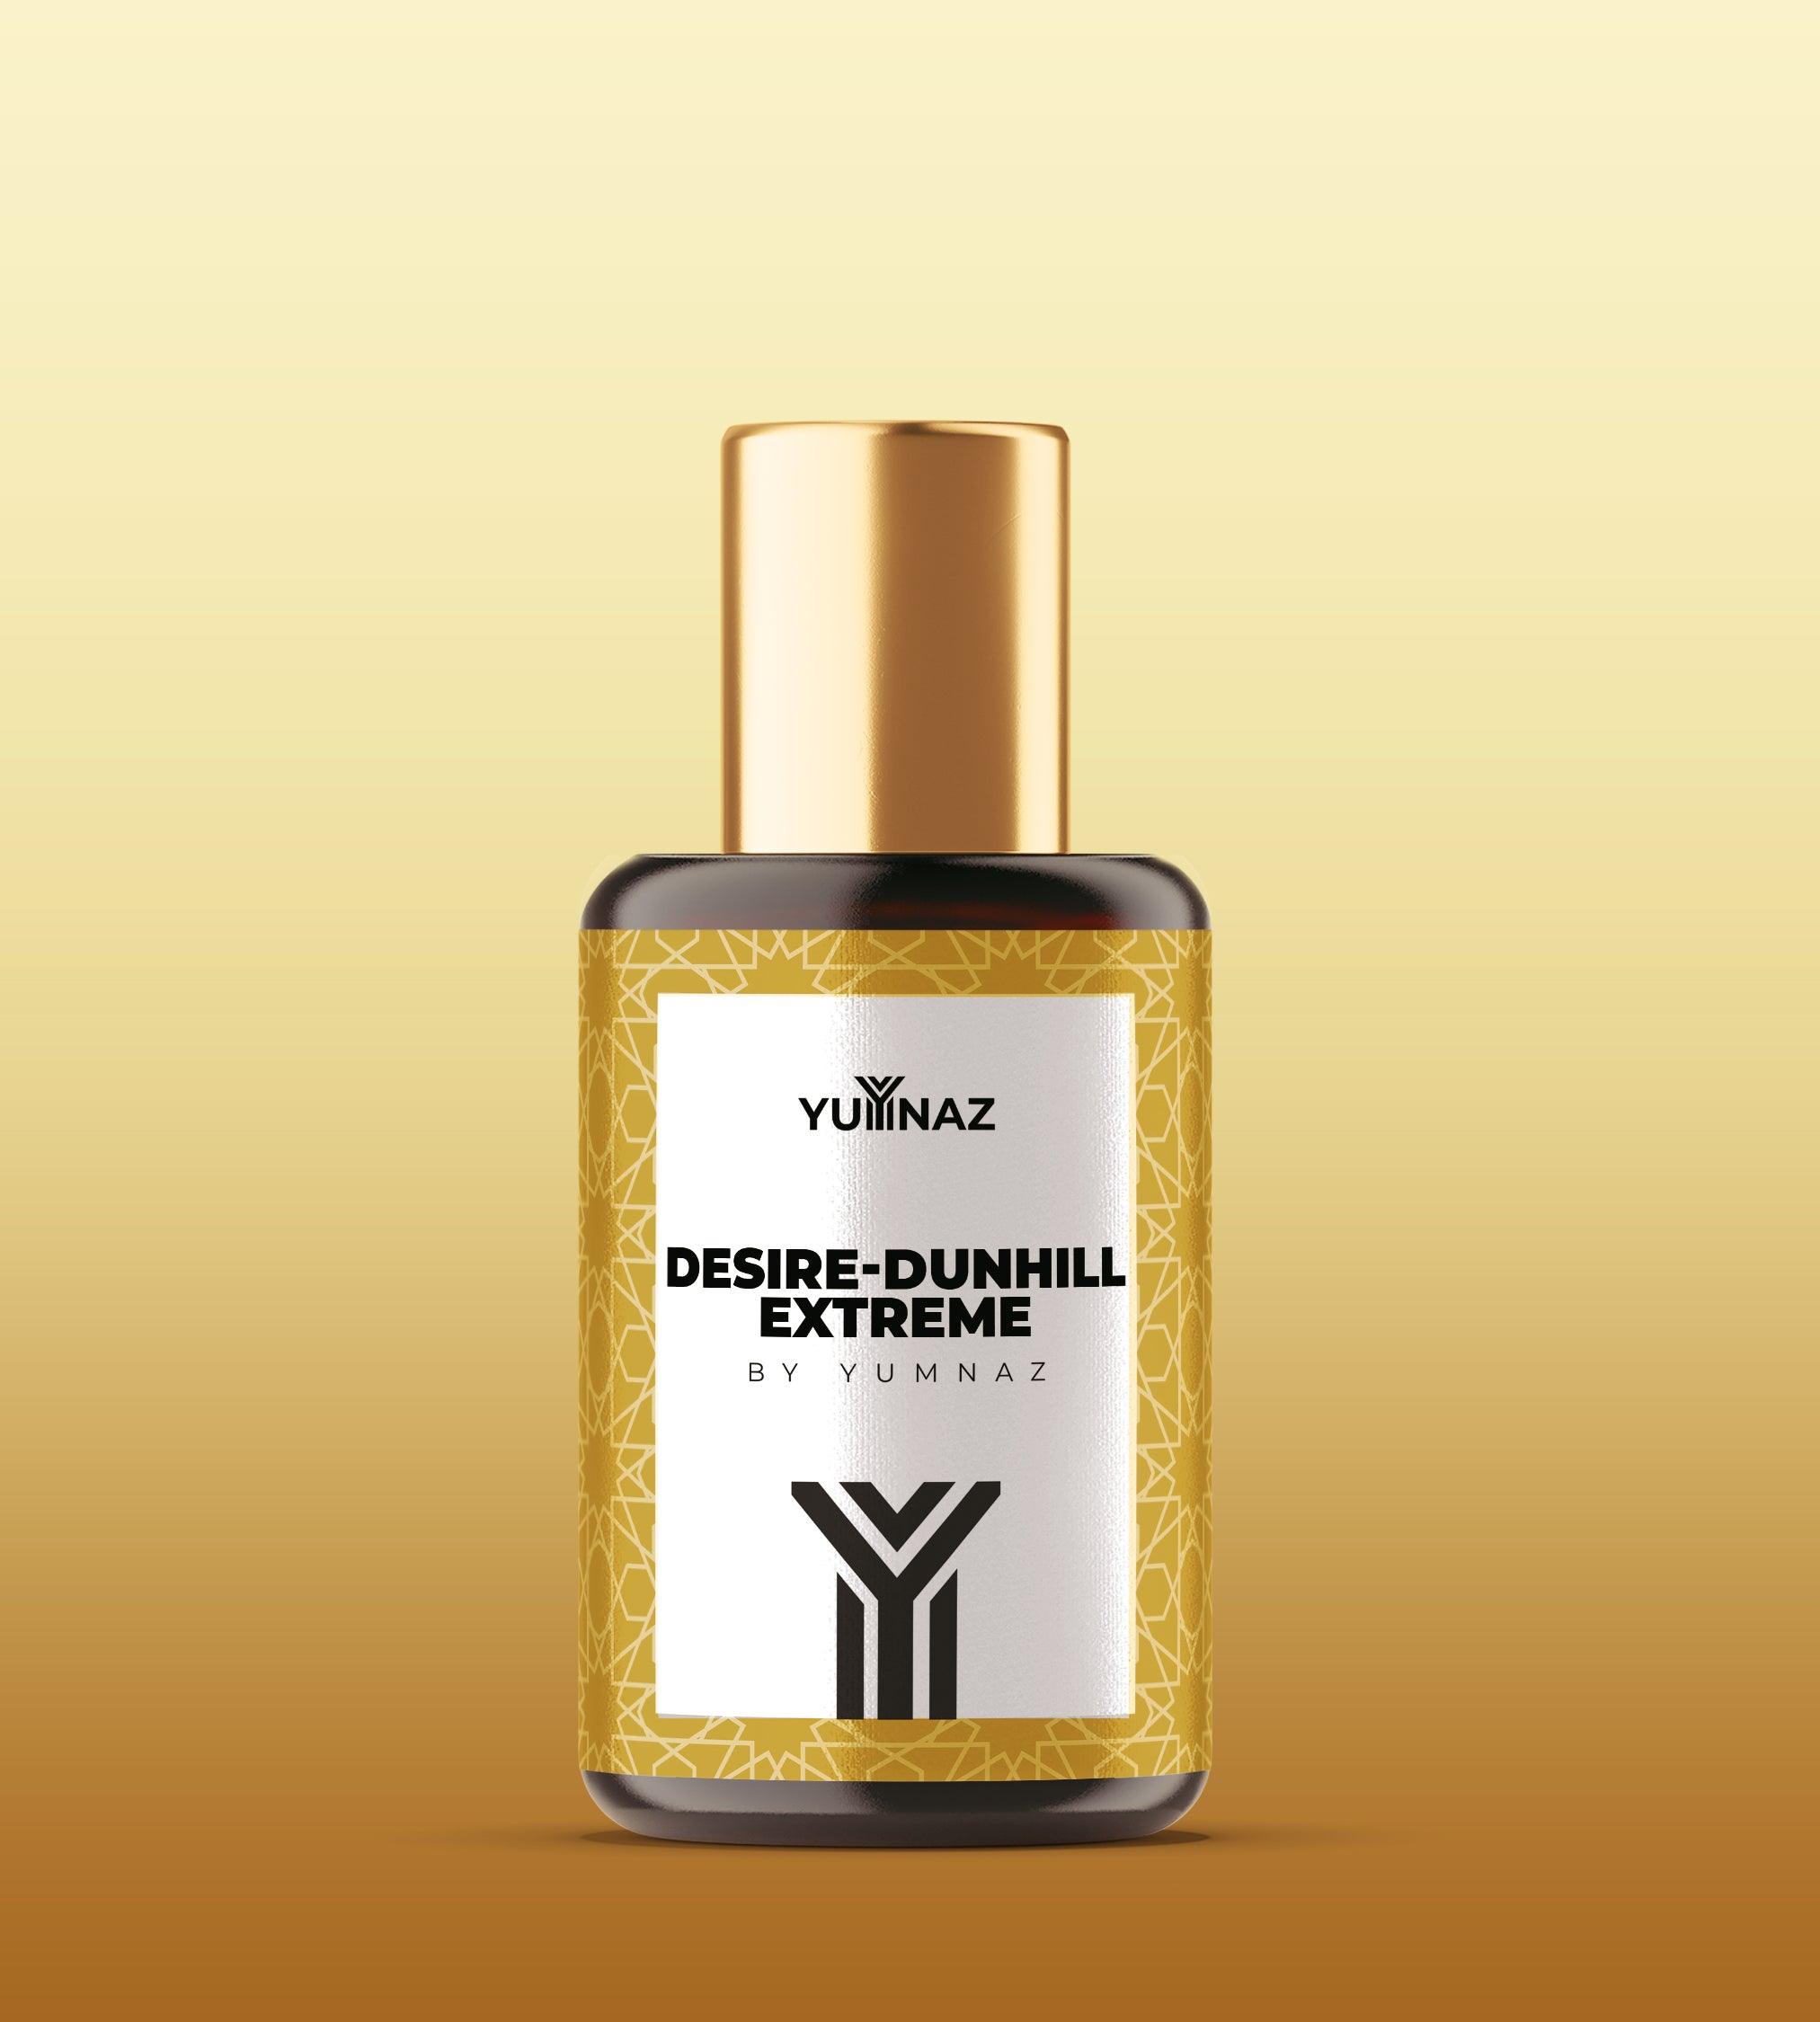 Dunhill Desire Extreme on a reasonable price in Pakistan - yumnaz